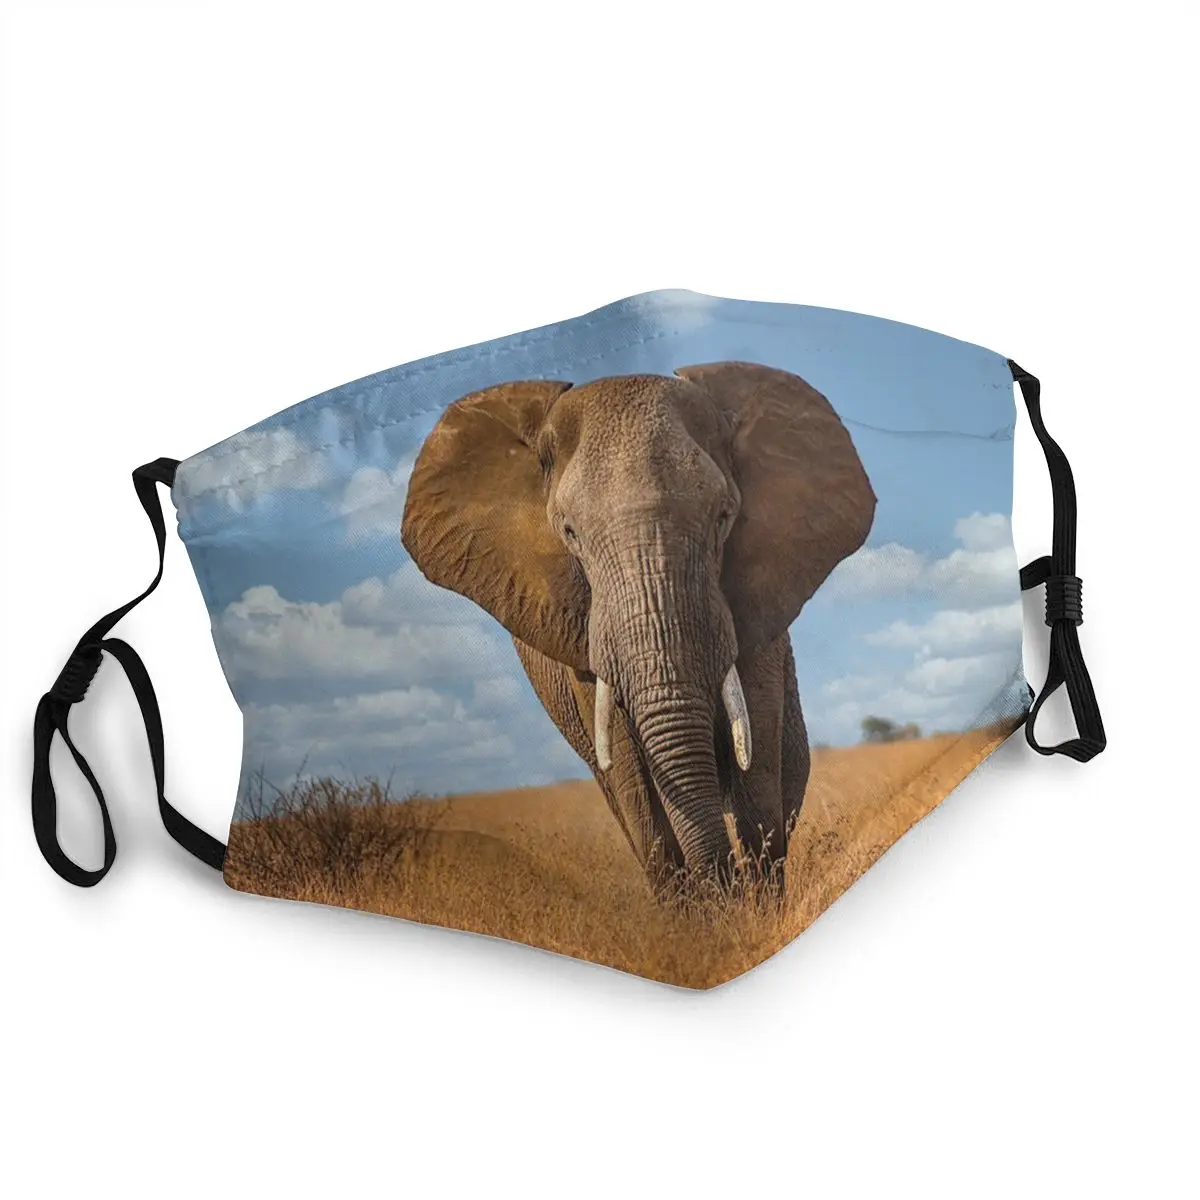 

African Elephant In Kruger National Park Non-Disposable Face Mask Anti Haze Dust Mask Protection Cover Respirator Mouth Muffle